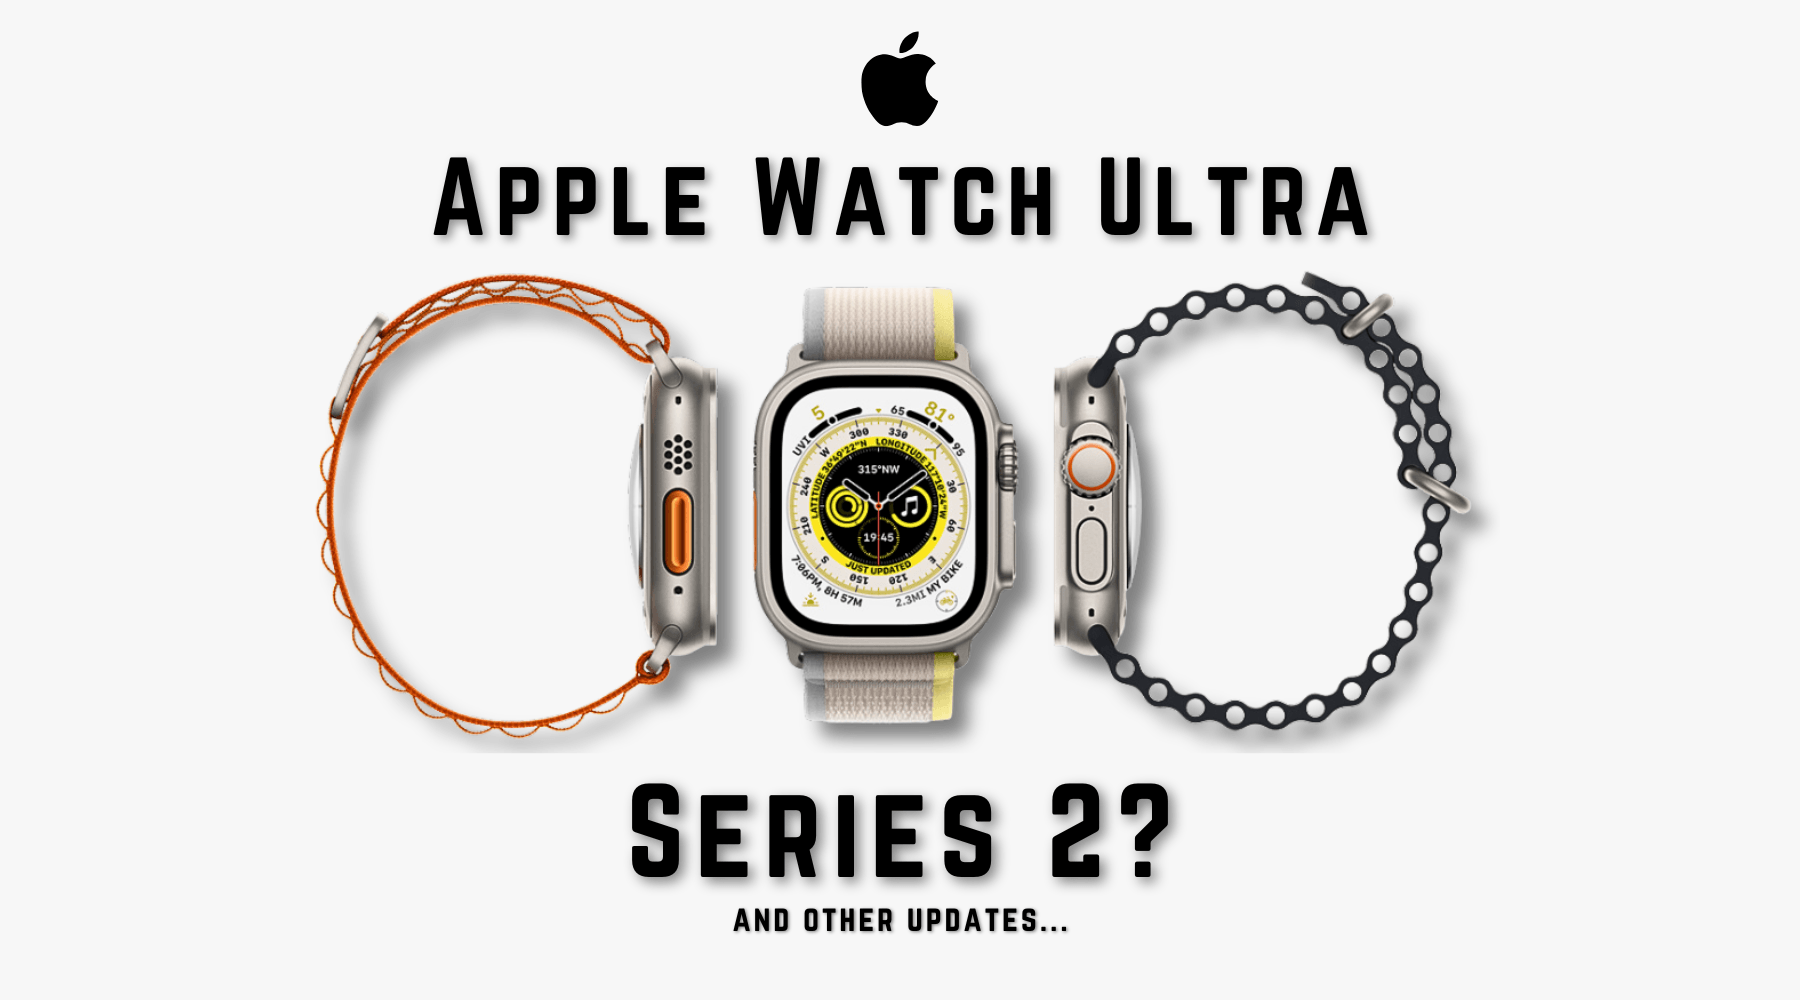 Is The Apple Watch Ultra Series 2 Coming This Autumn? - Buckle and Band